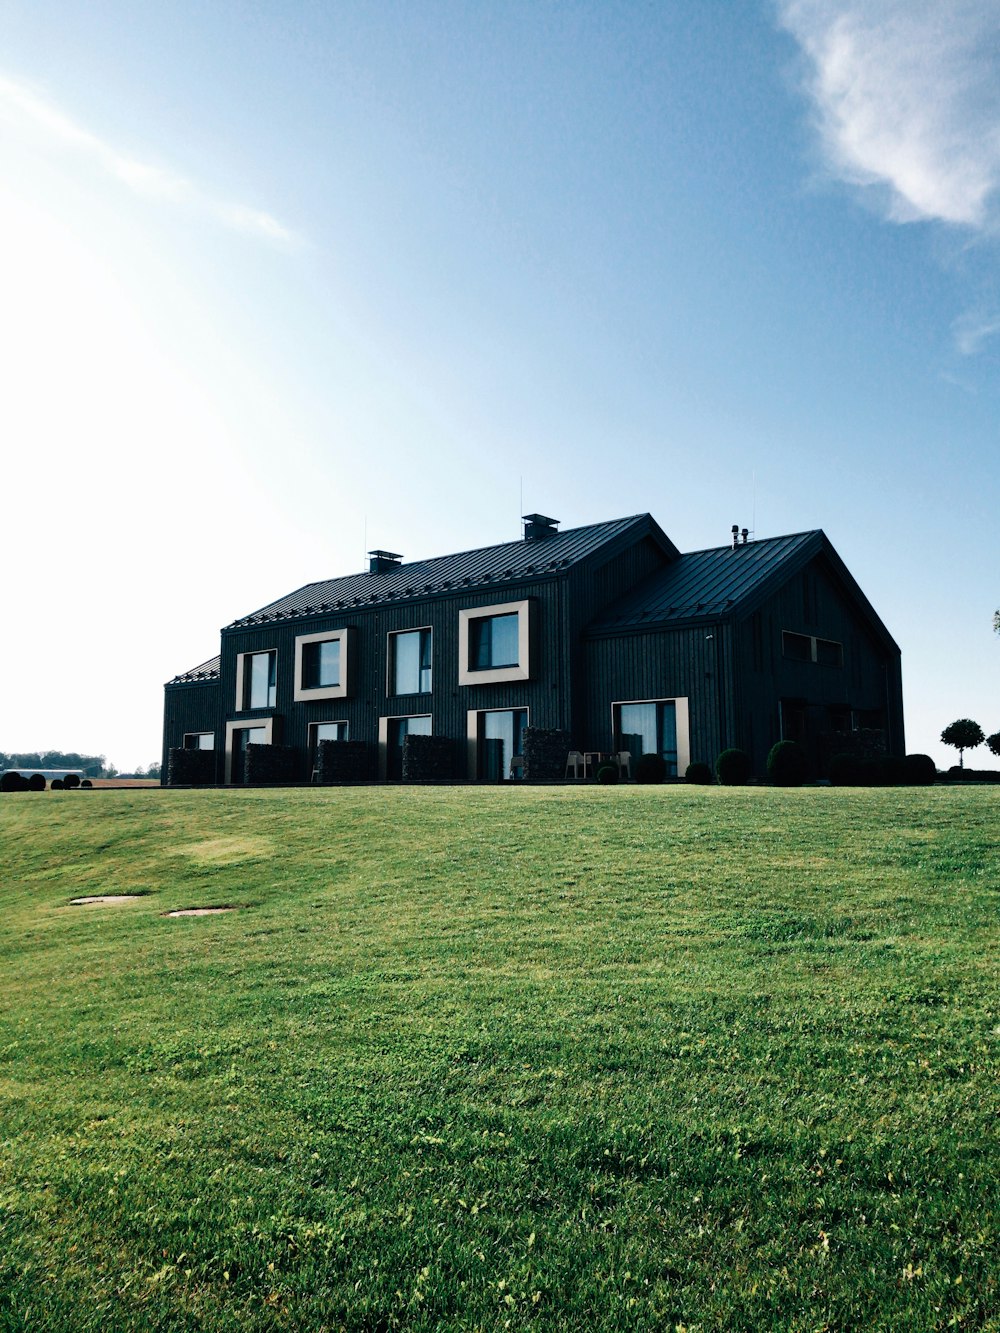 black and white concrete house on green grass field under blue sky during daytime